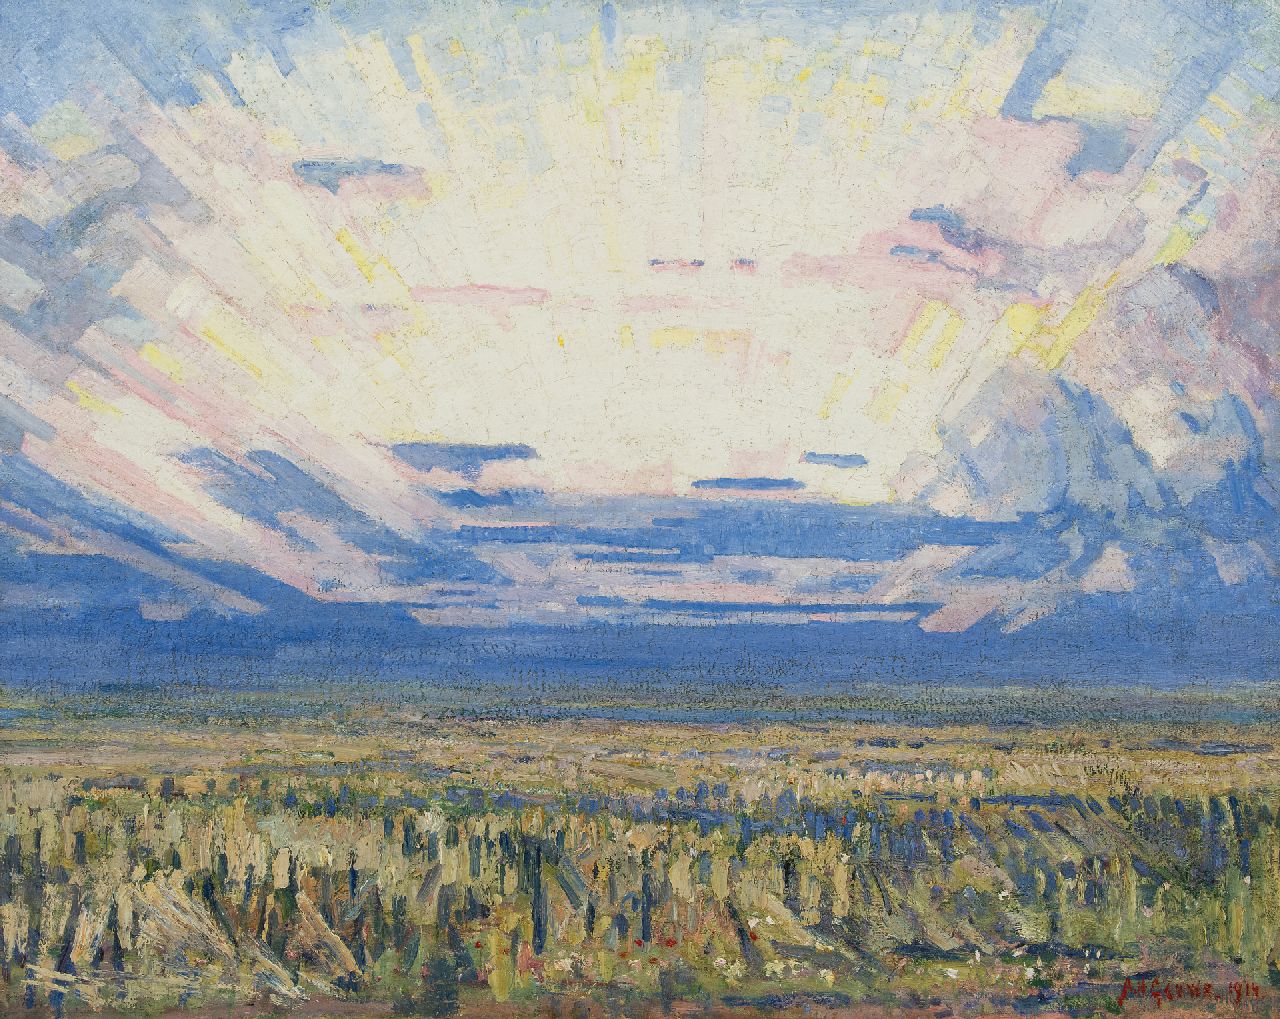 Herman Gouwe | Landscape at sunrise, oil on canvas, 79.8 x 99.5 cm, signed l.r. and dated 1914